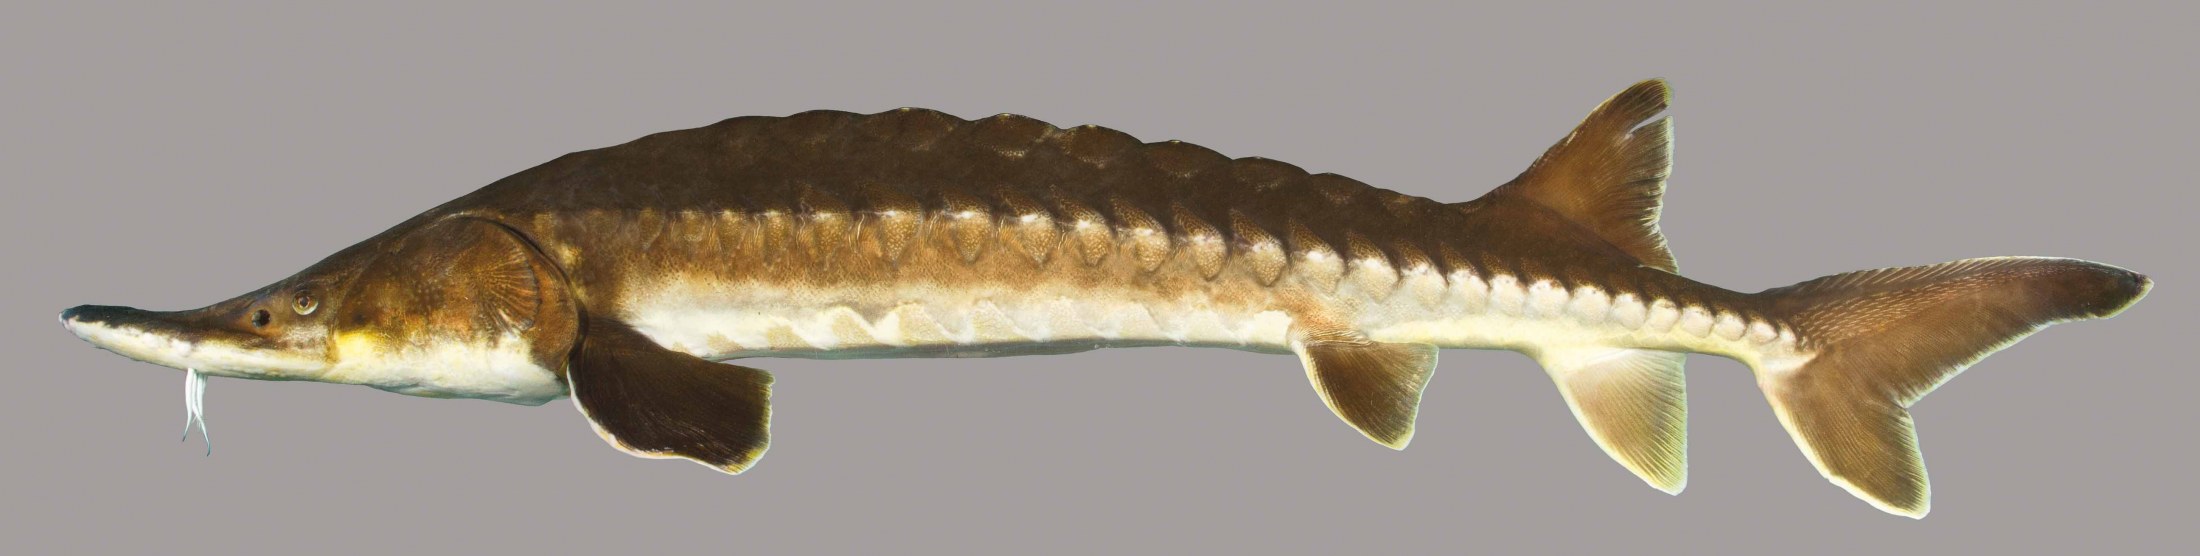 A lateral view of the Gulf Sturgeon